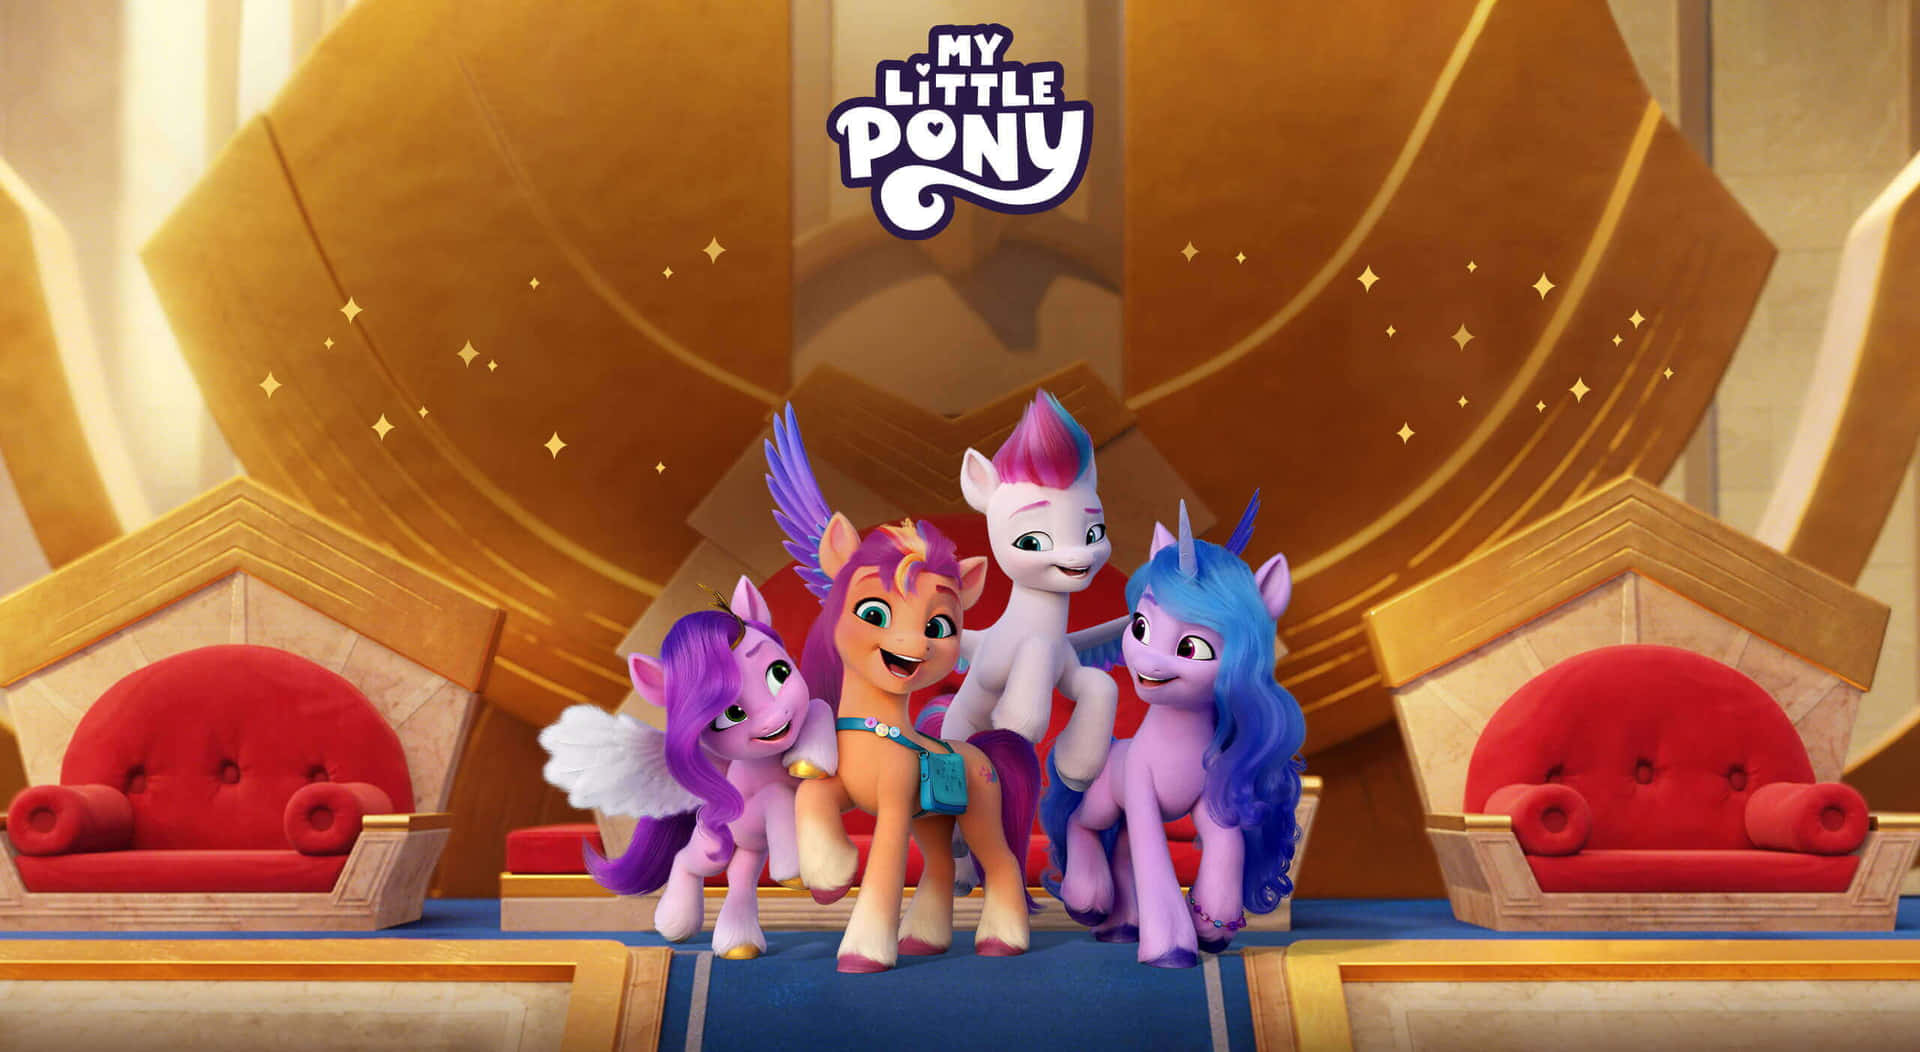 Explore the magical world of My Little Pony.